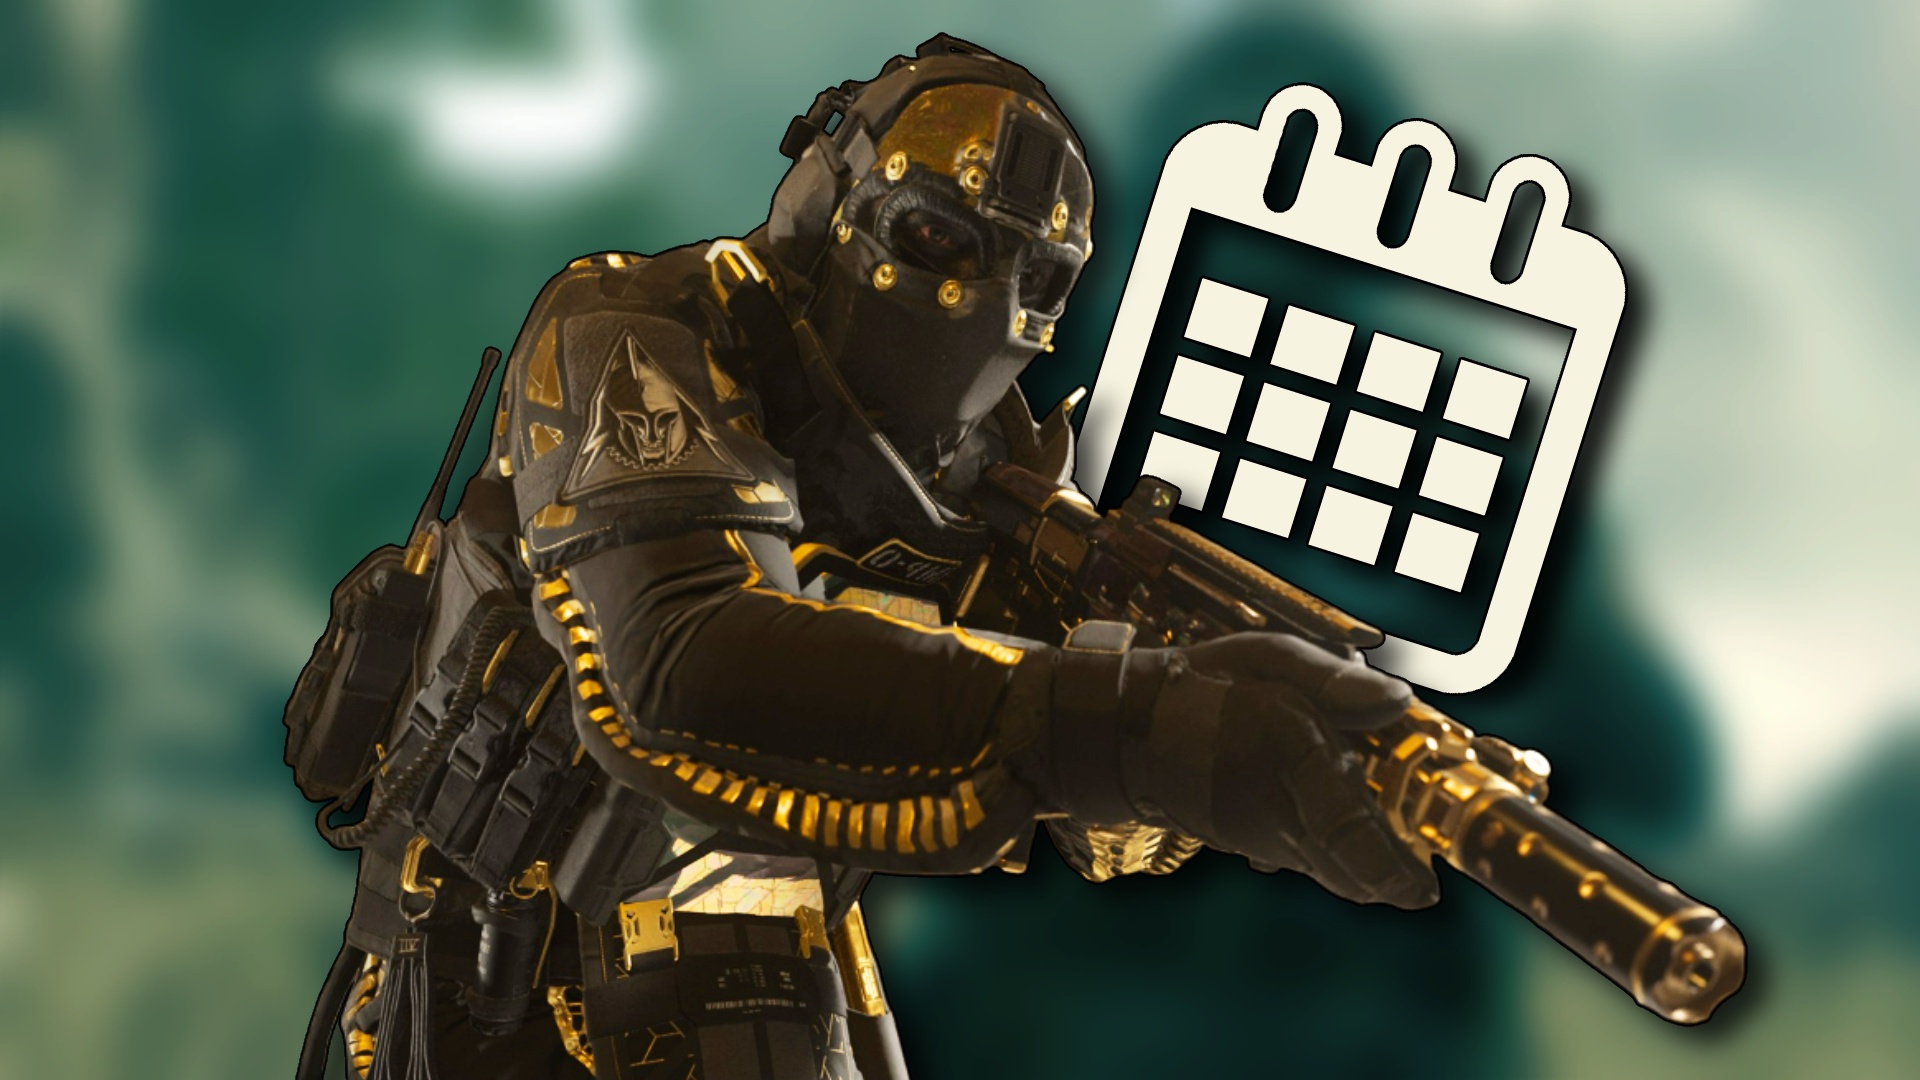 Call Of Duty: Warzone Season 6 Start-Time And Everything You Need